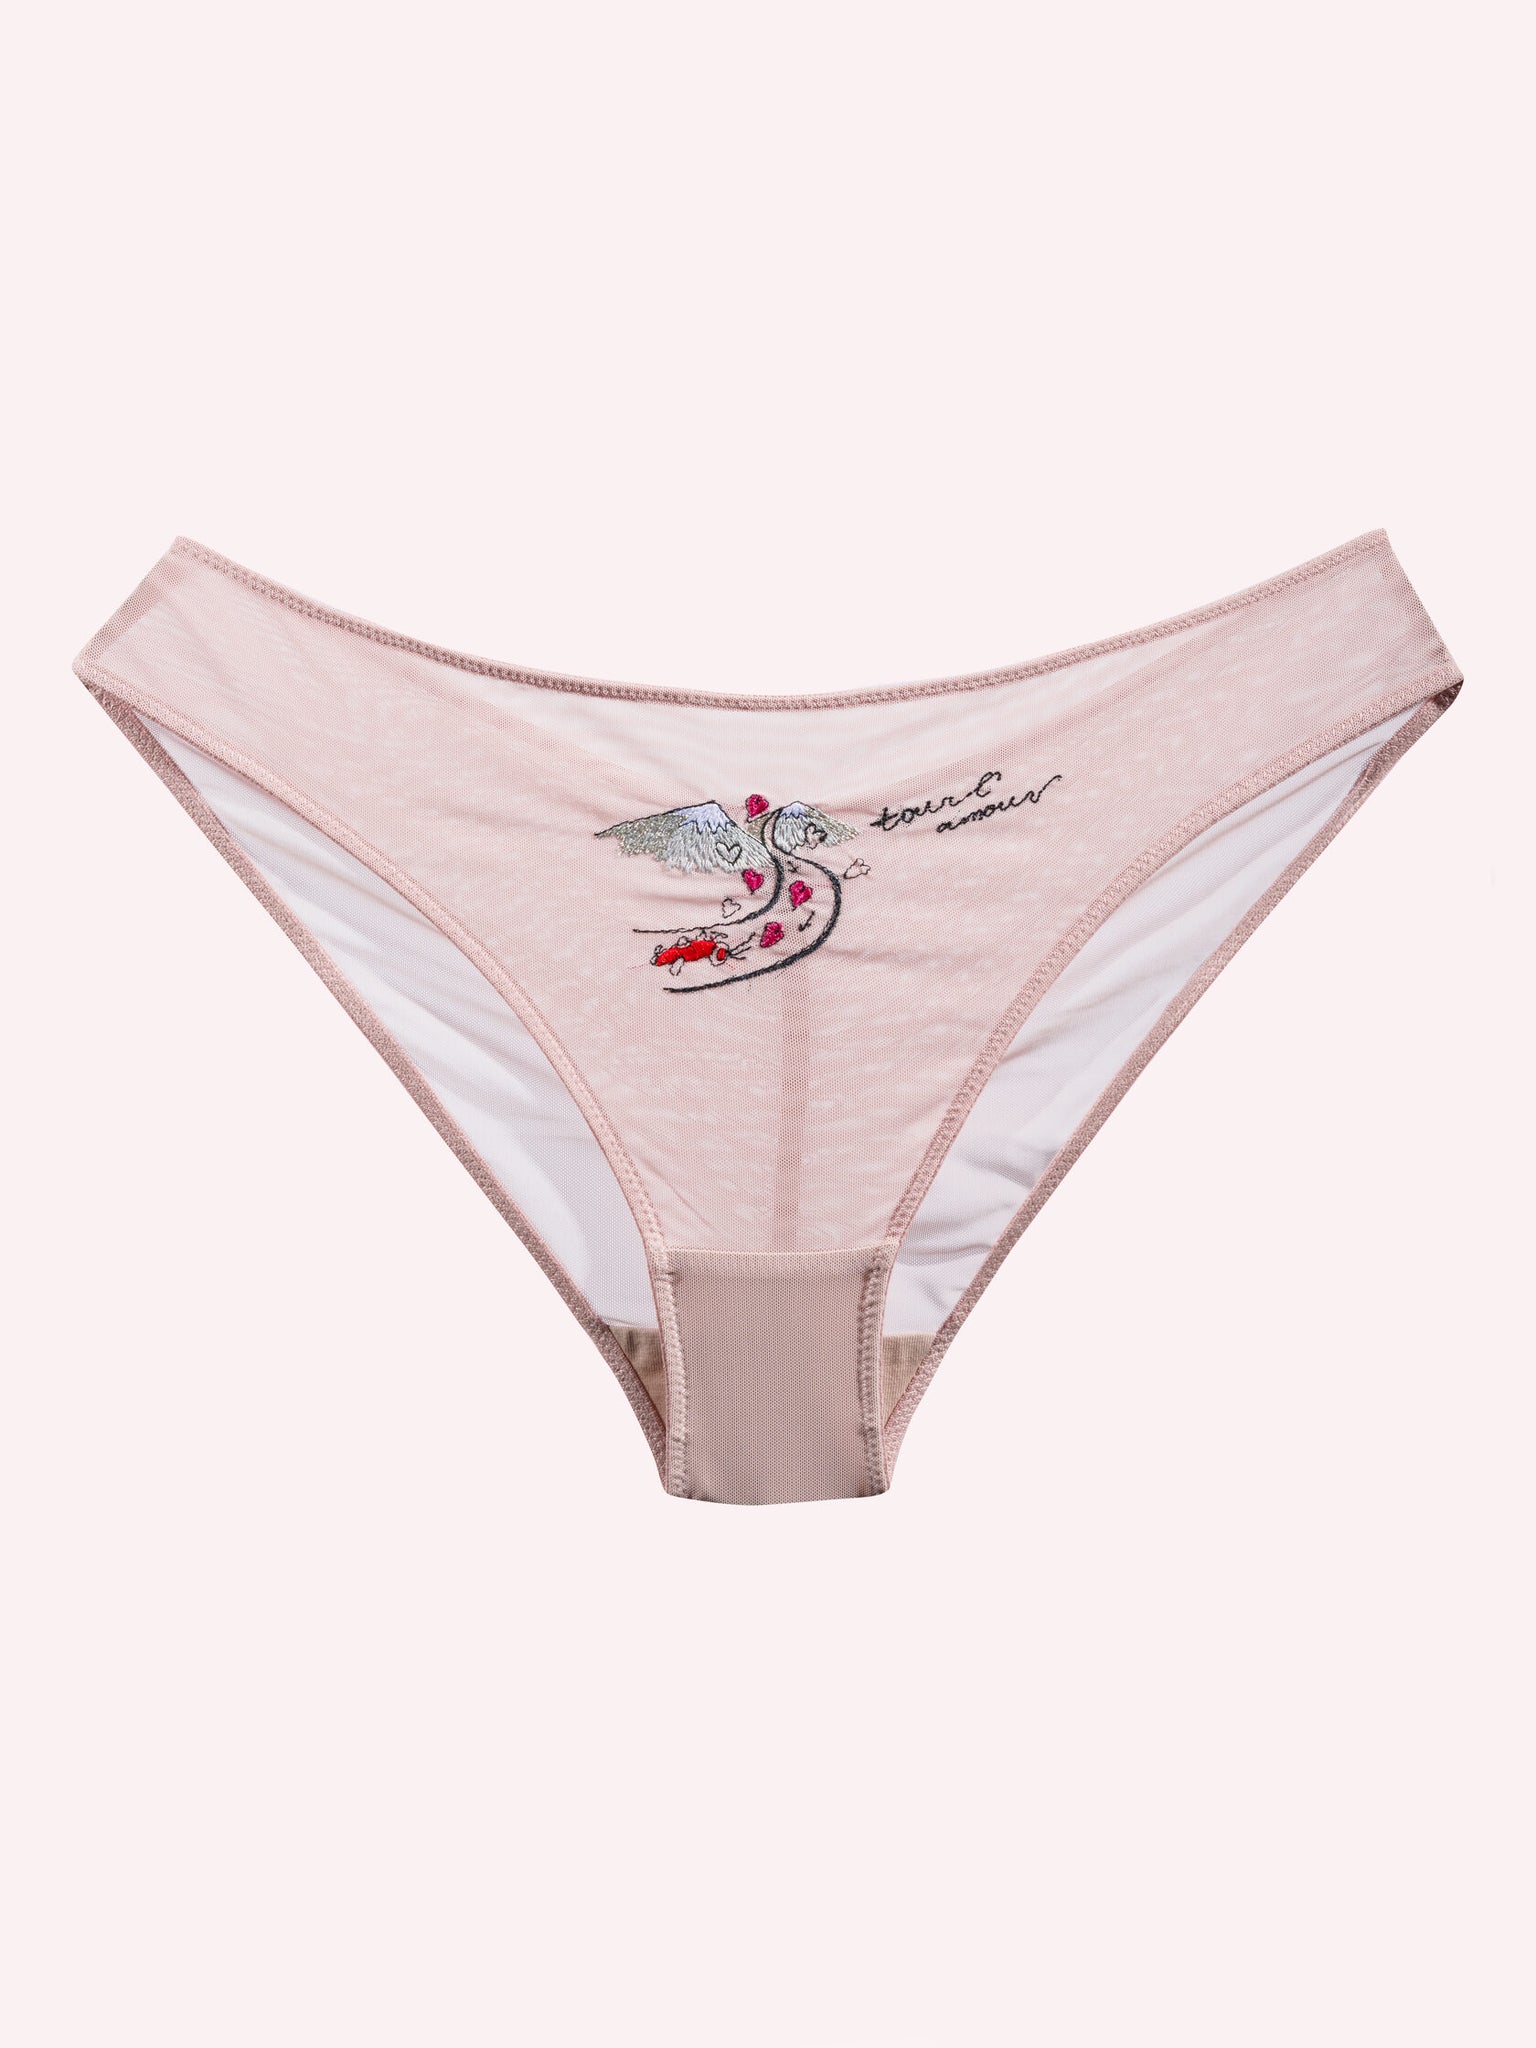 Tour L'Amour Low Rise Knickers